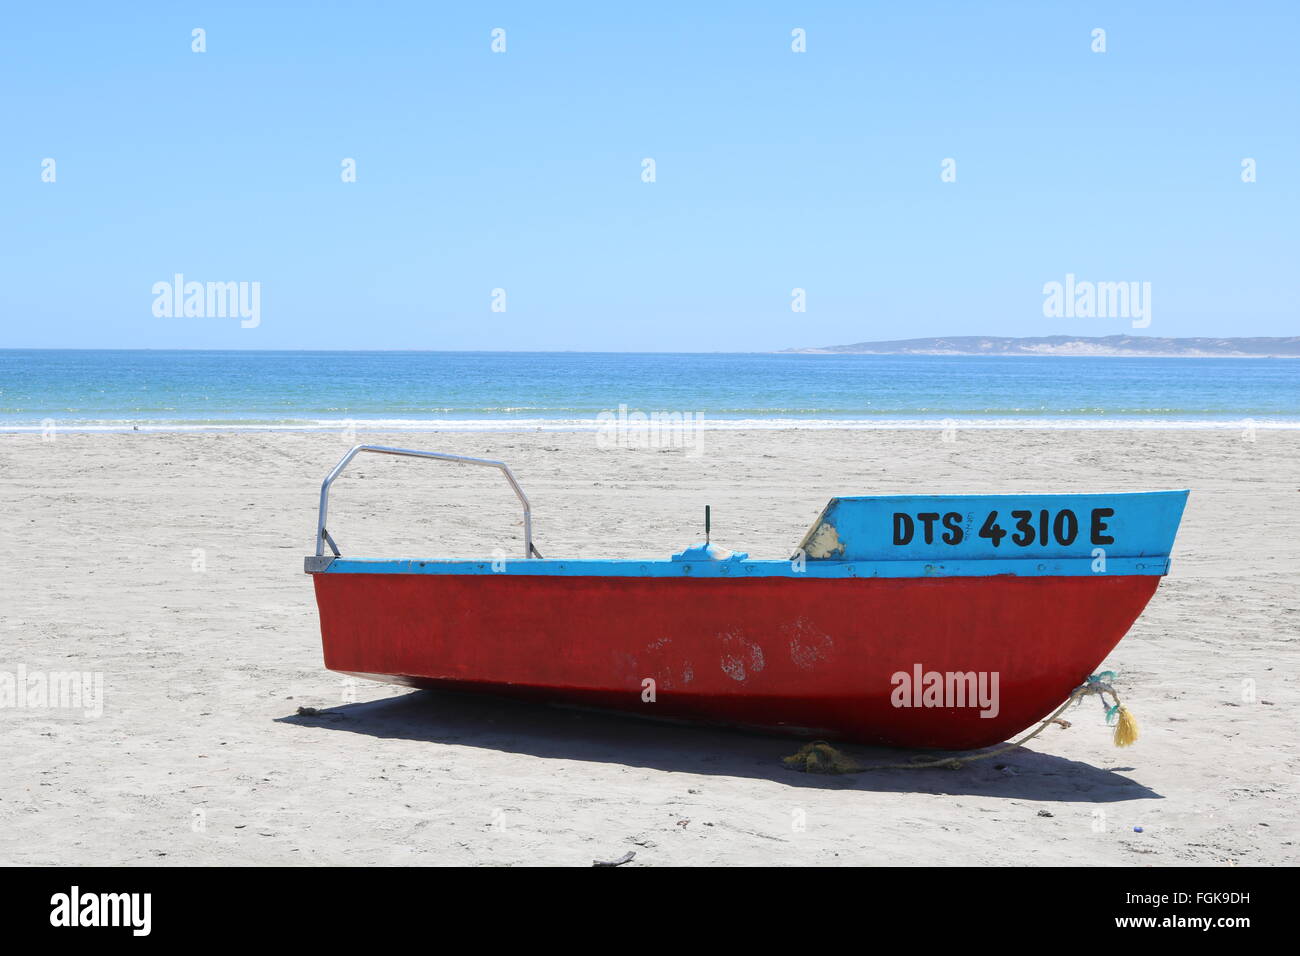 Fishing and Rock lobster boats, paternoster, Western Cape, South Africa Stock Photo